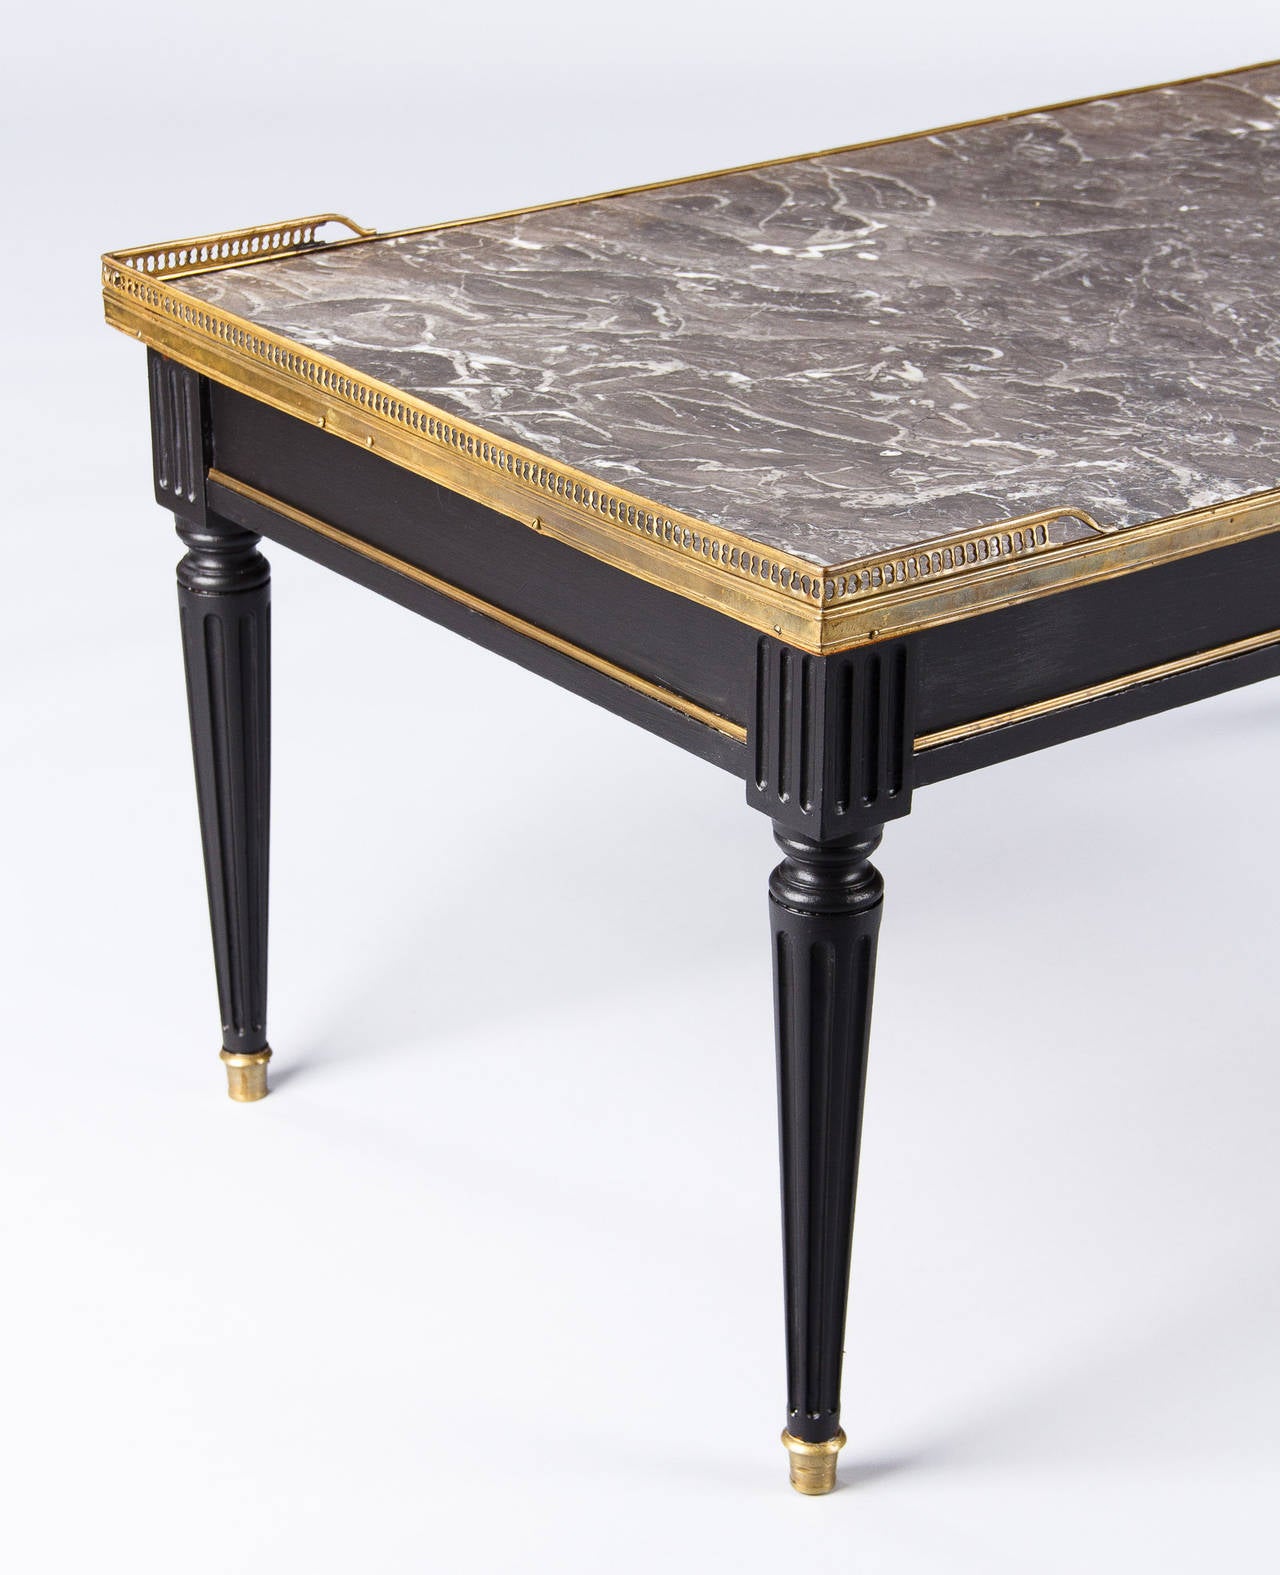 An elegant coffee or cocktail table in the Louis XVI style painted black on mahogany with a brass galleried top and trim around the apron. Also featuring brass sabots at the base of the fluted legs and a veined grey marble tabletop.